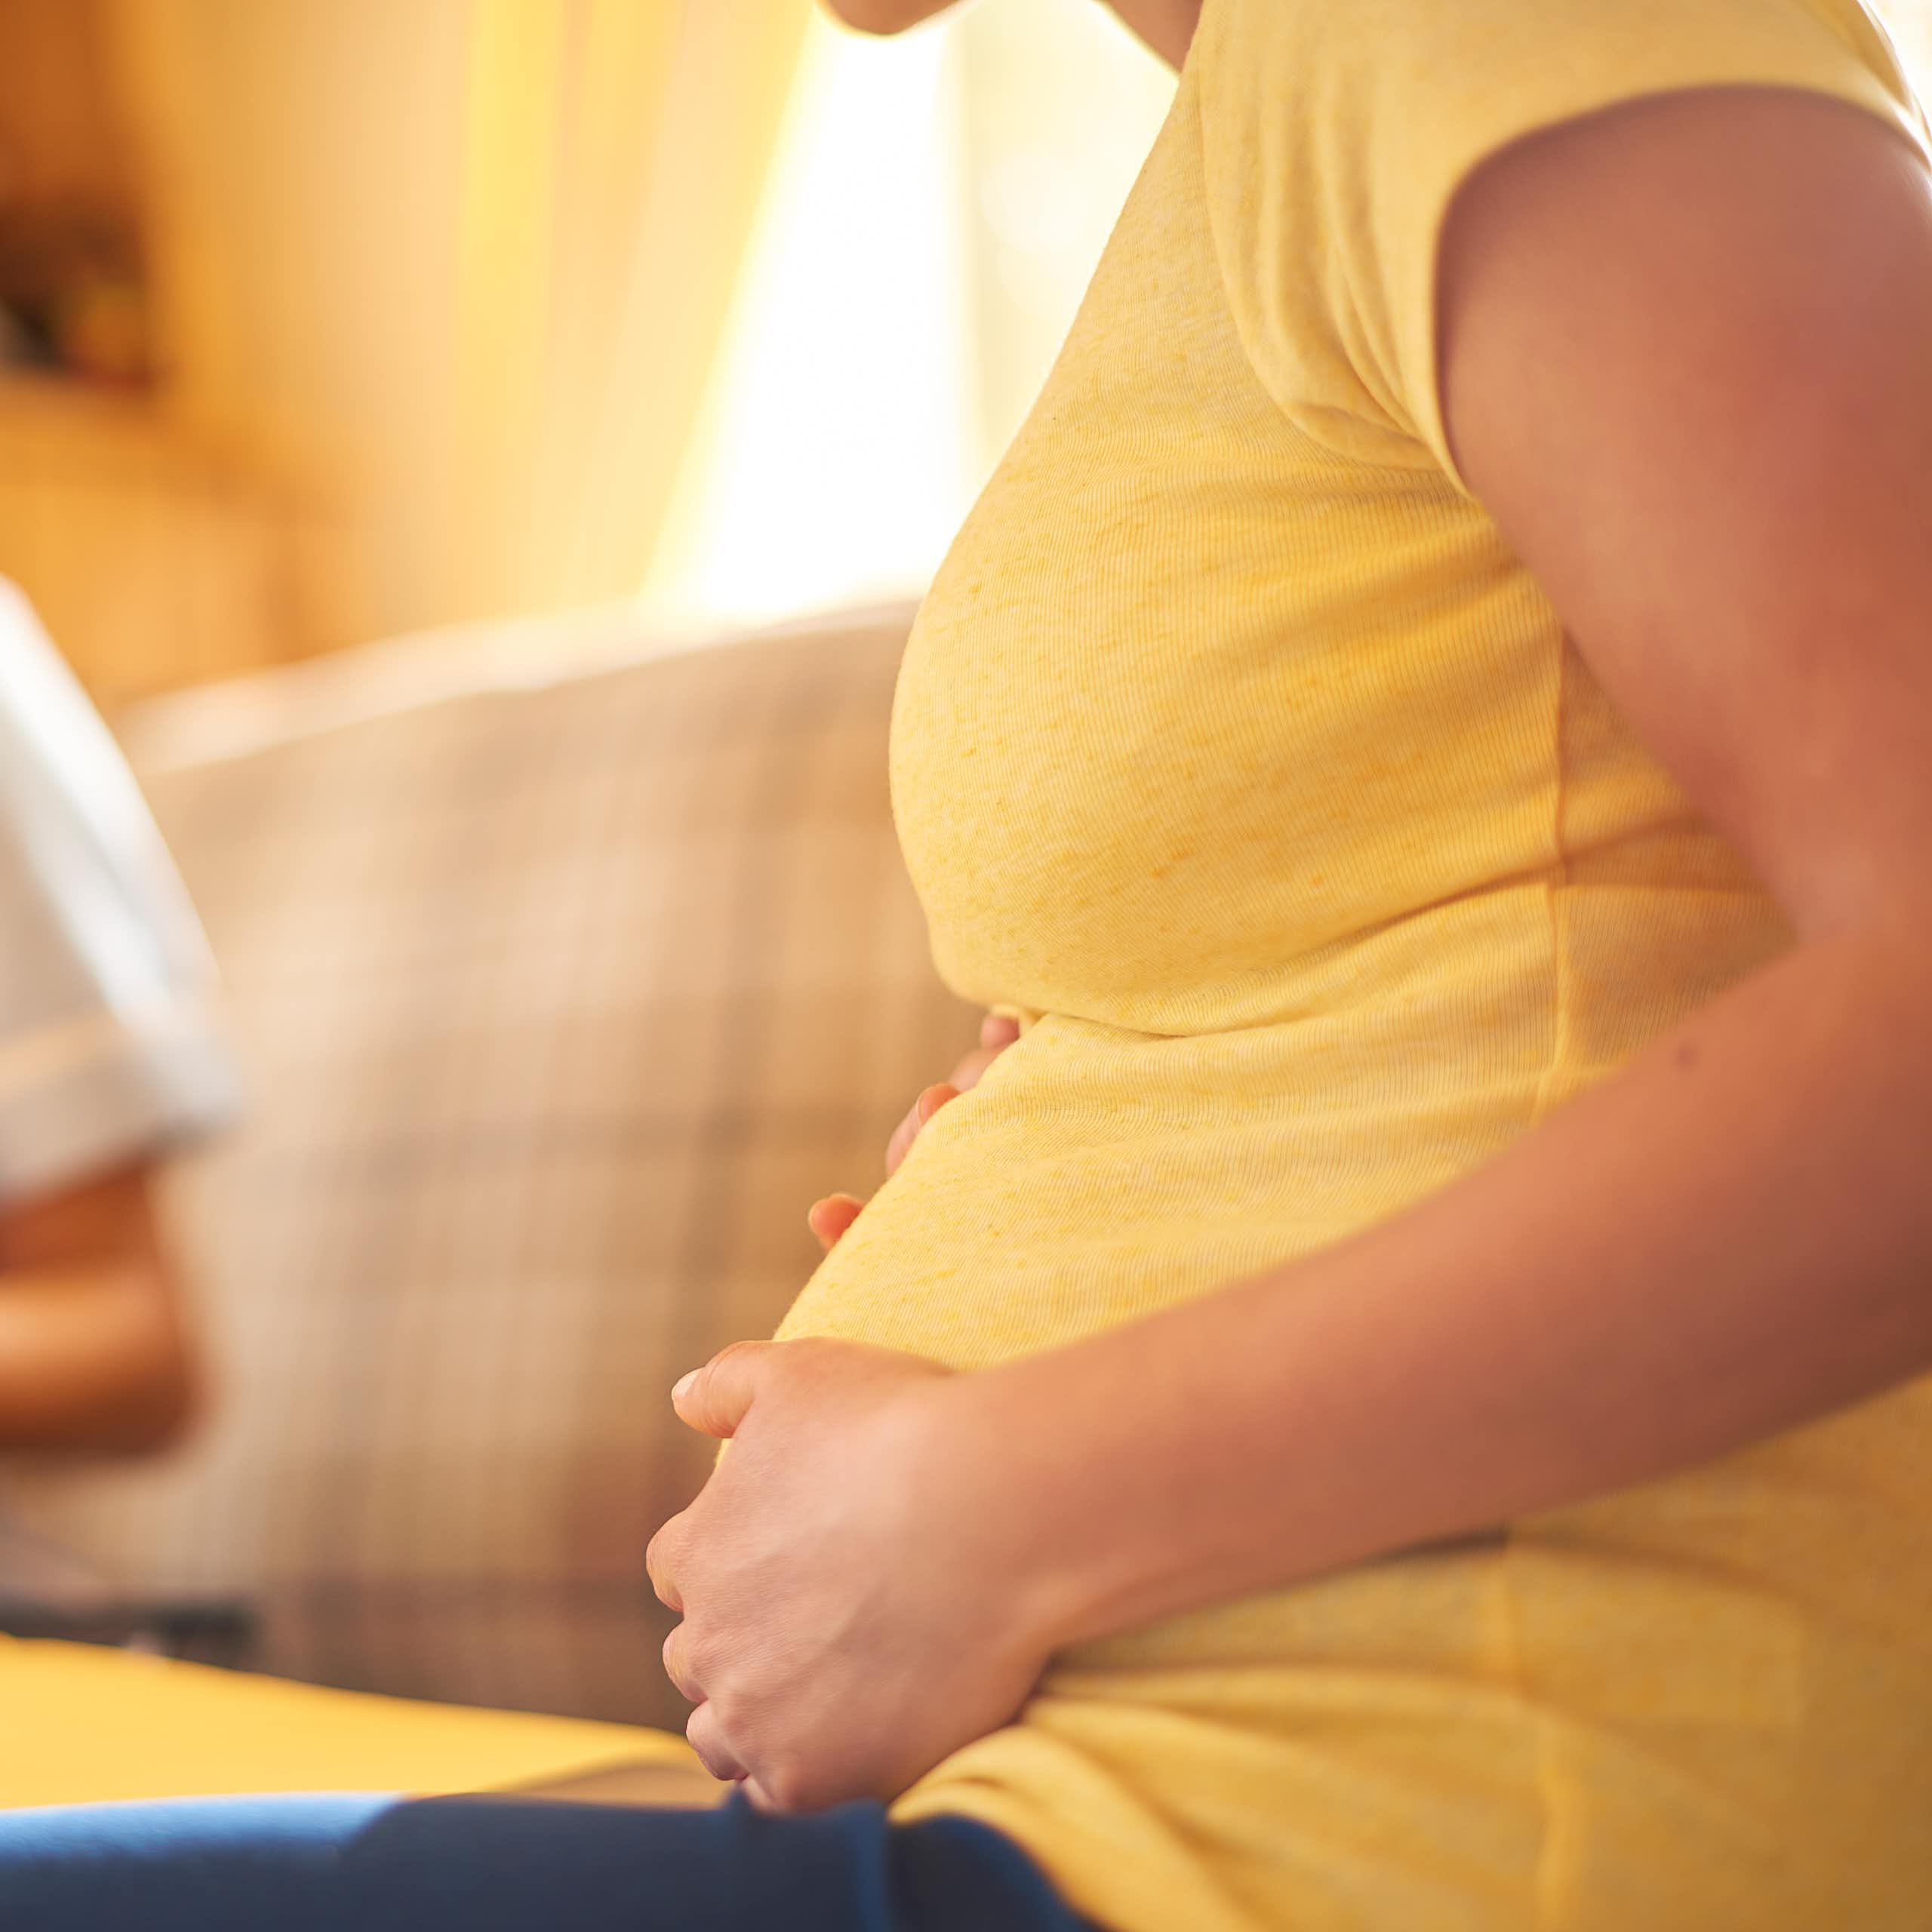 Pregnant woman holds her hands to her belly while sitting on a couch talking with a midwife who is taking notes.